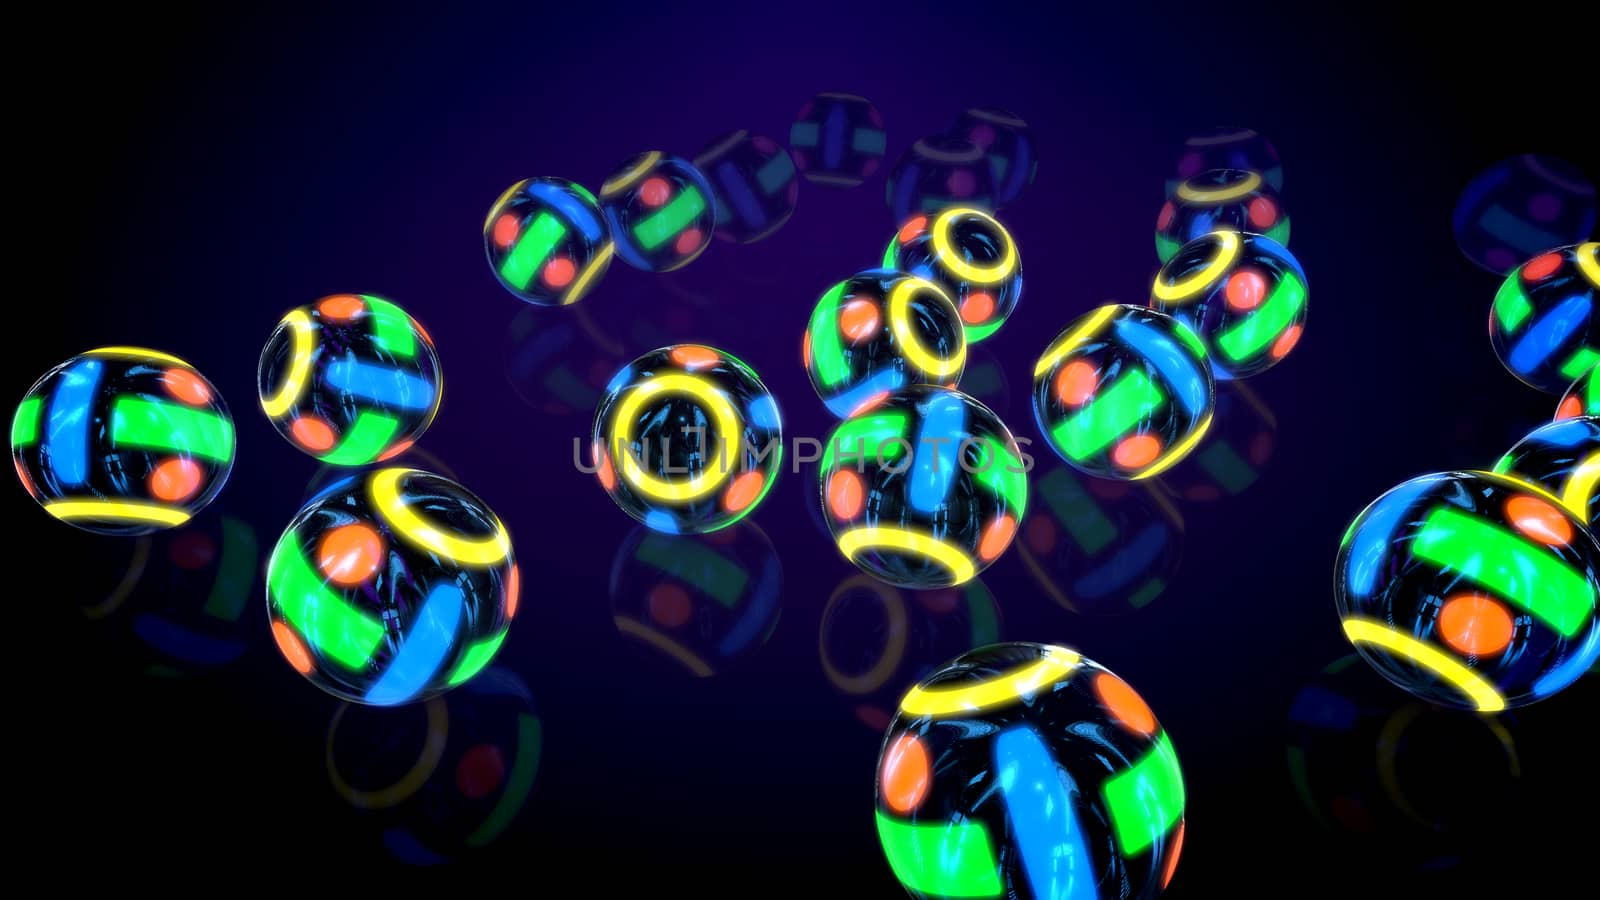 Exciting 3d illustration of four stripes of neon looking multicolored balls rolling on flat surface in the black background. They create the mood of advancement, techno joy and optimism.